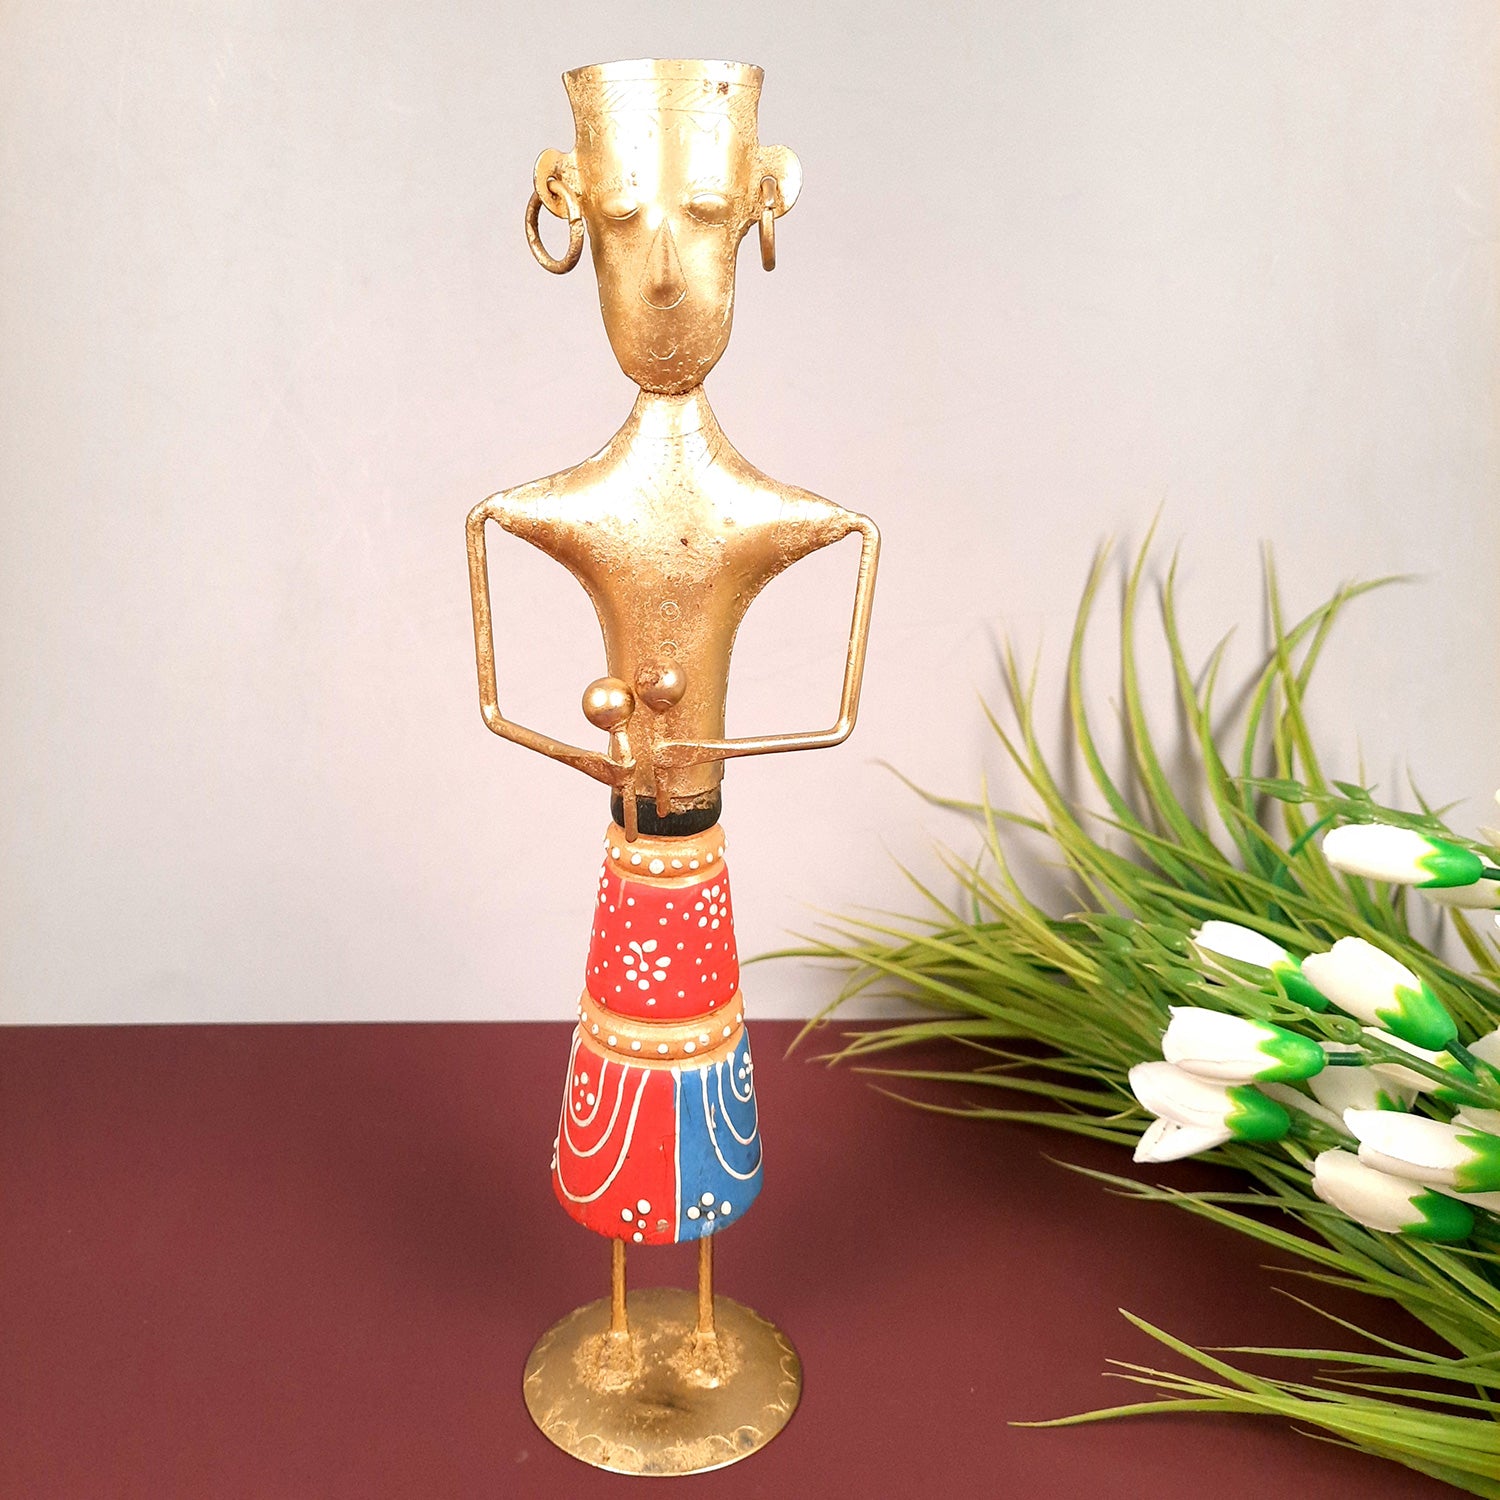 Showpiece Musician | Decorative Tribal Musician Figurine - For Home, Table, Living Room & TV Unit | Show Piece For Office Desk & Gifts - 12 Inch - Apkamart